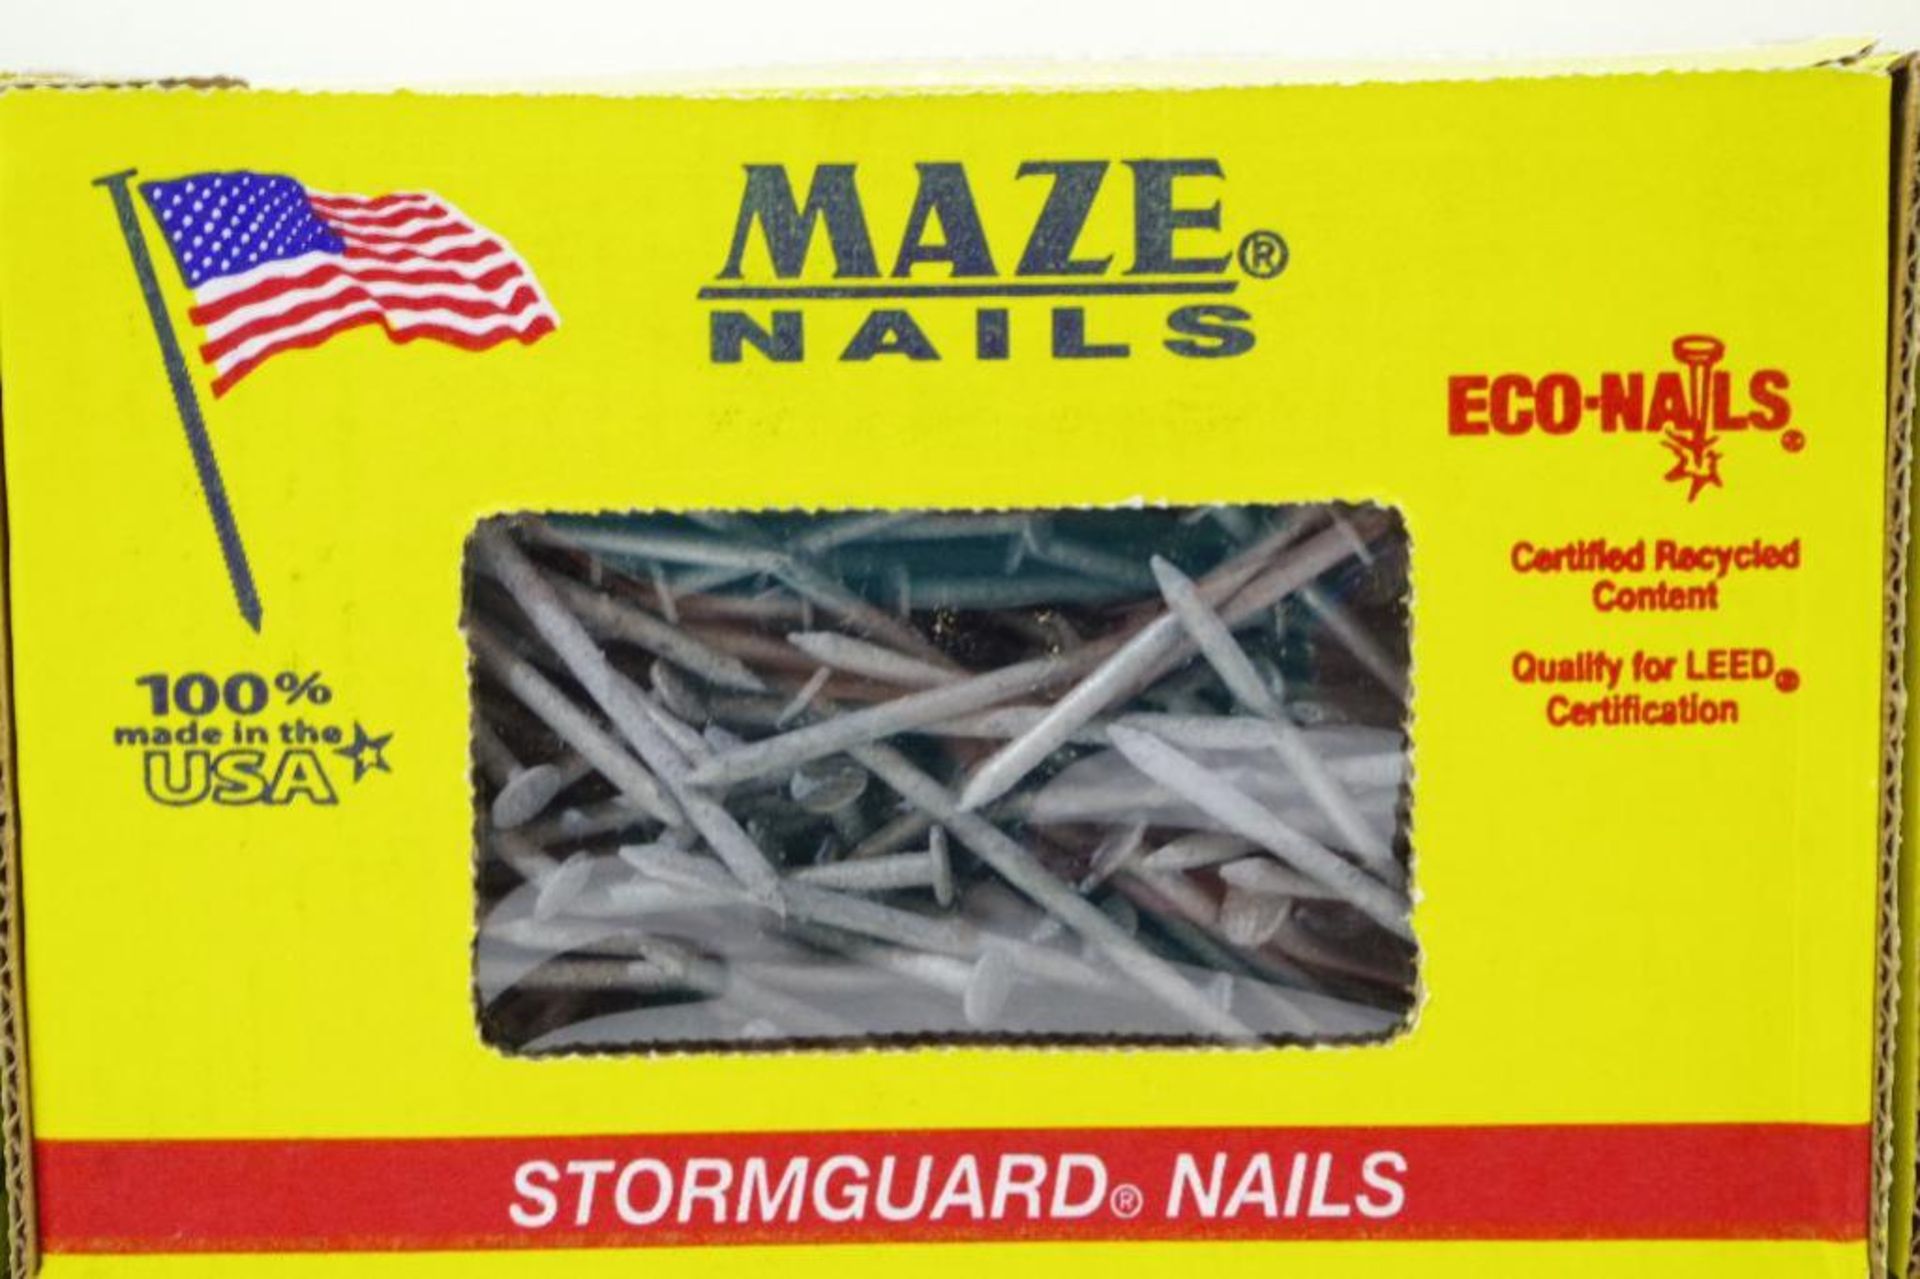 (30) Lbs. MAZE Stormguard Hot-Dip Galvanized Box Nail 2" 6d M/N S205, Made in USA (6 Boxes 5 Lbs.) - Image 2 of 7